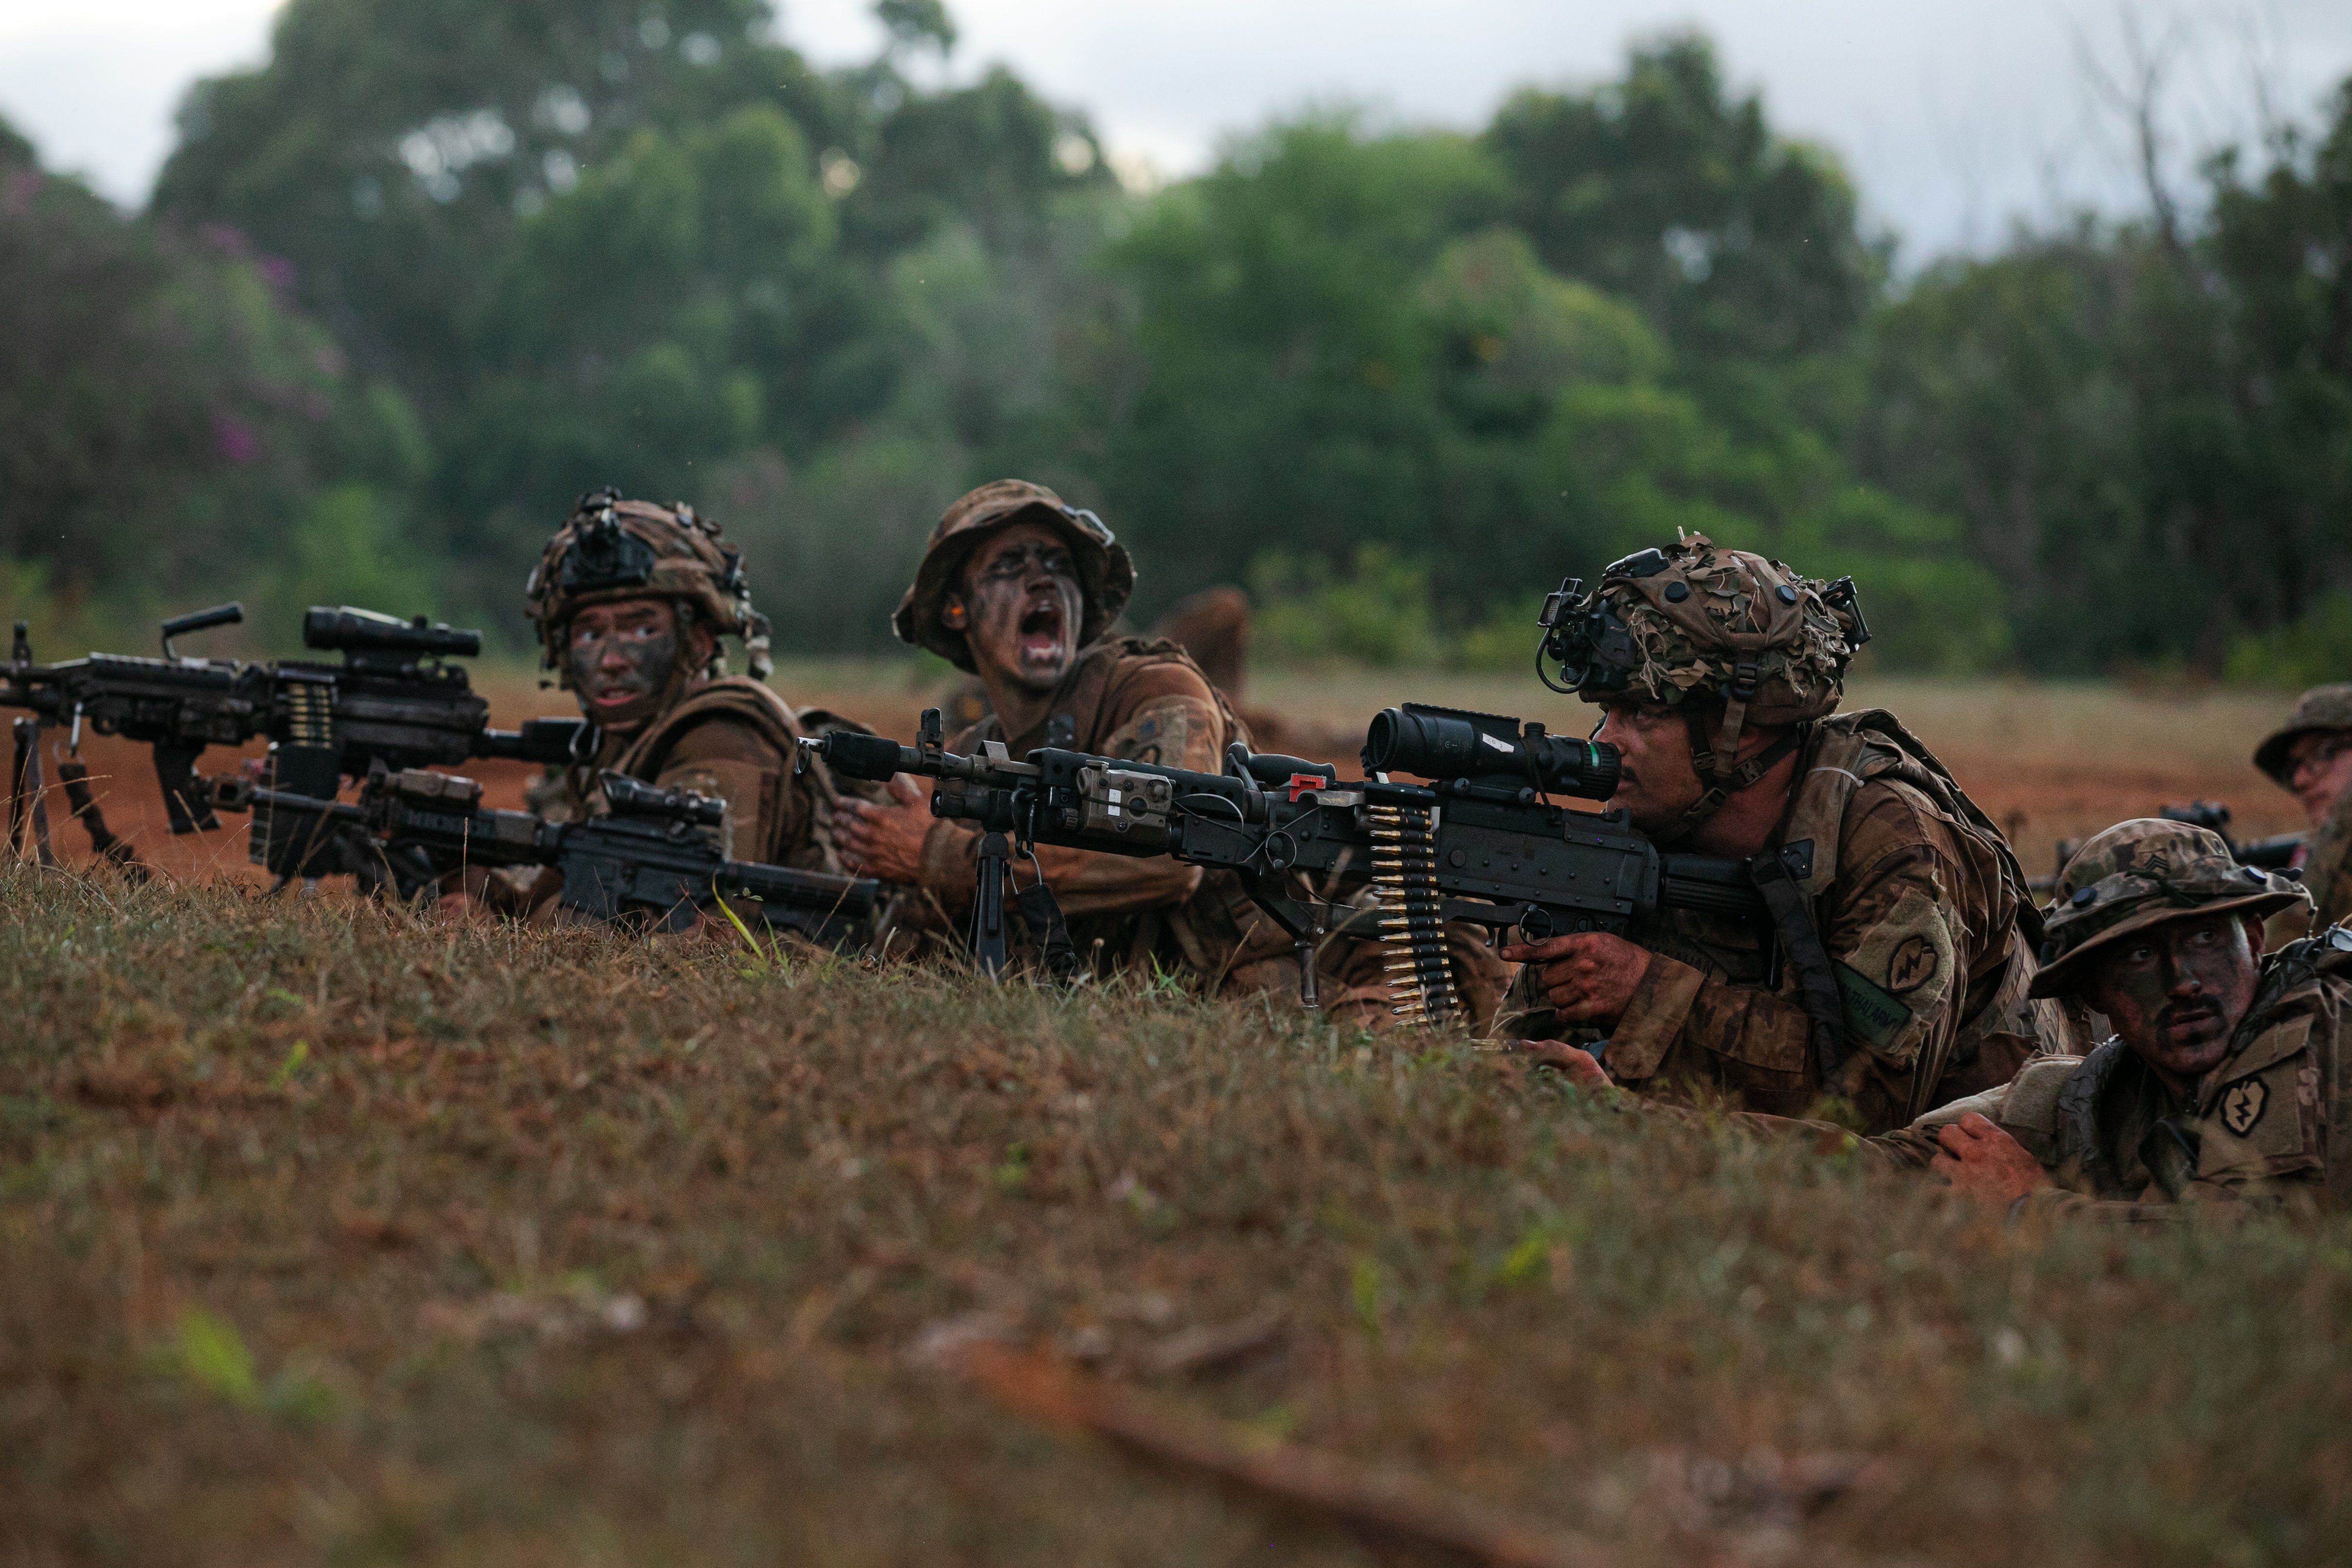 U.S. soldiers defend their area after being ambushed during a Joint Multinational Pacific Readiness Center rotation on Helemano Military Reservation, Hawaii, Oct. 27, 2021. (Spc. Rachel Christensen/Army)